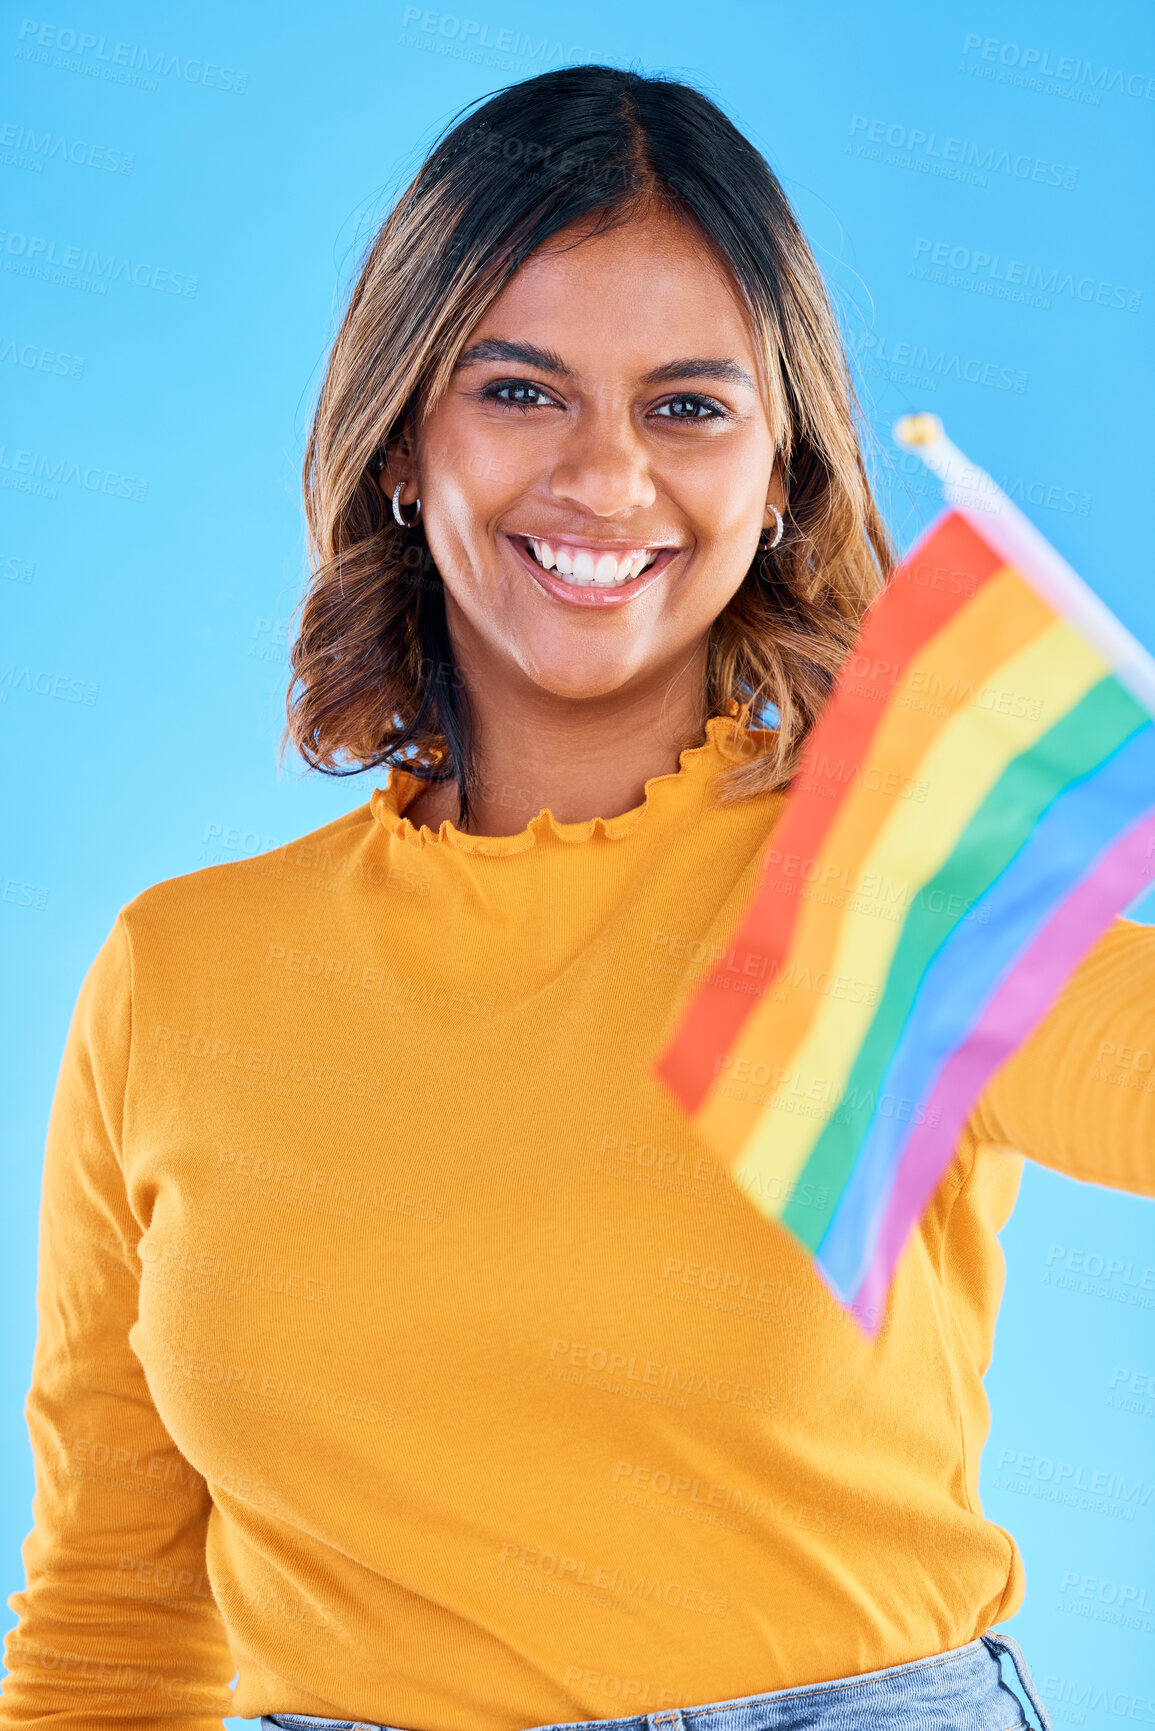 Buy stock photo Portrait, flag and gay with a woman on a blue background in studio feeling proud of her lgbt status. Smile, freedom and equality with a happy young female holding a rainbow symbol of inclusion